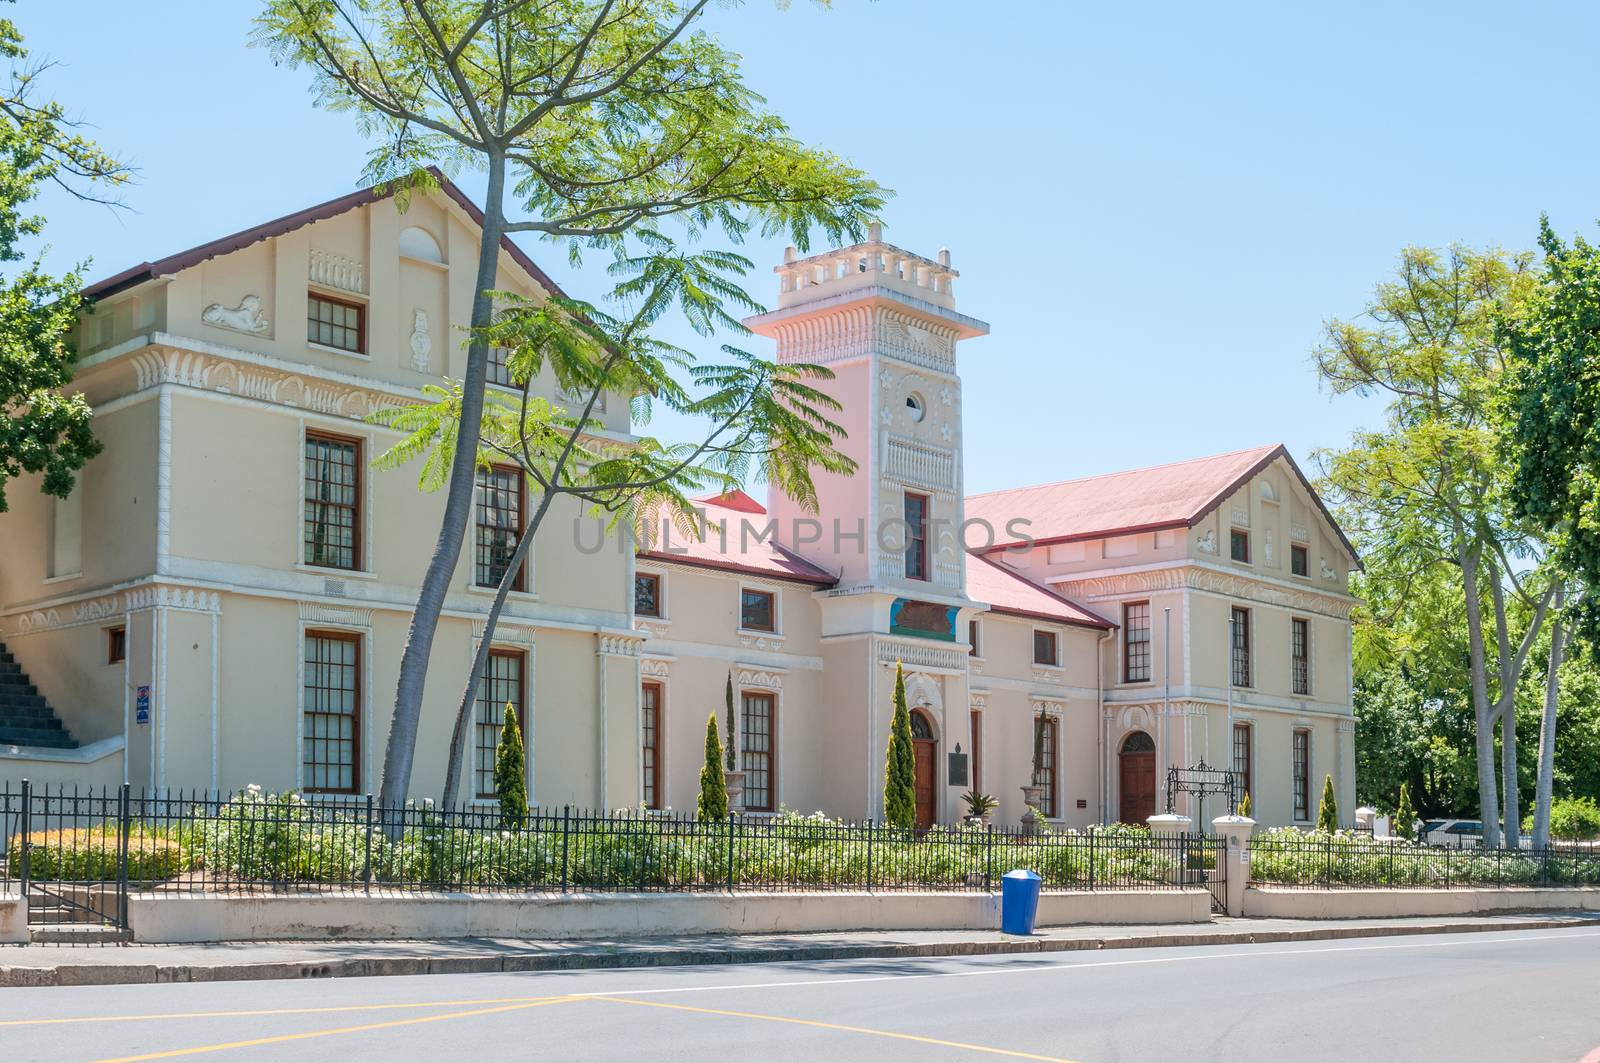 Original building of the Paarl Gymnasium, an Afrikaans Boys High School, opened in 1858